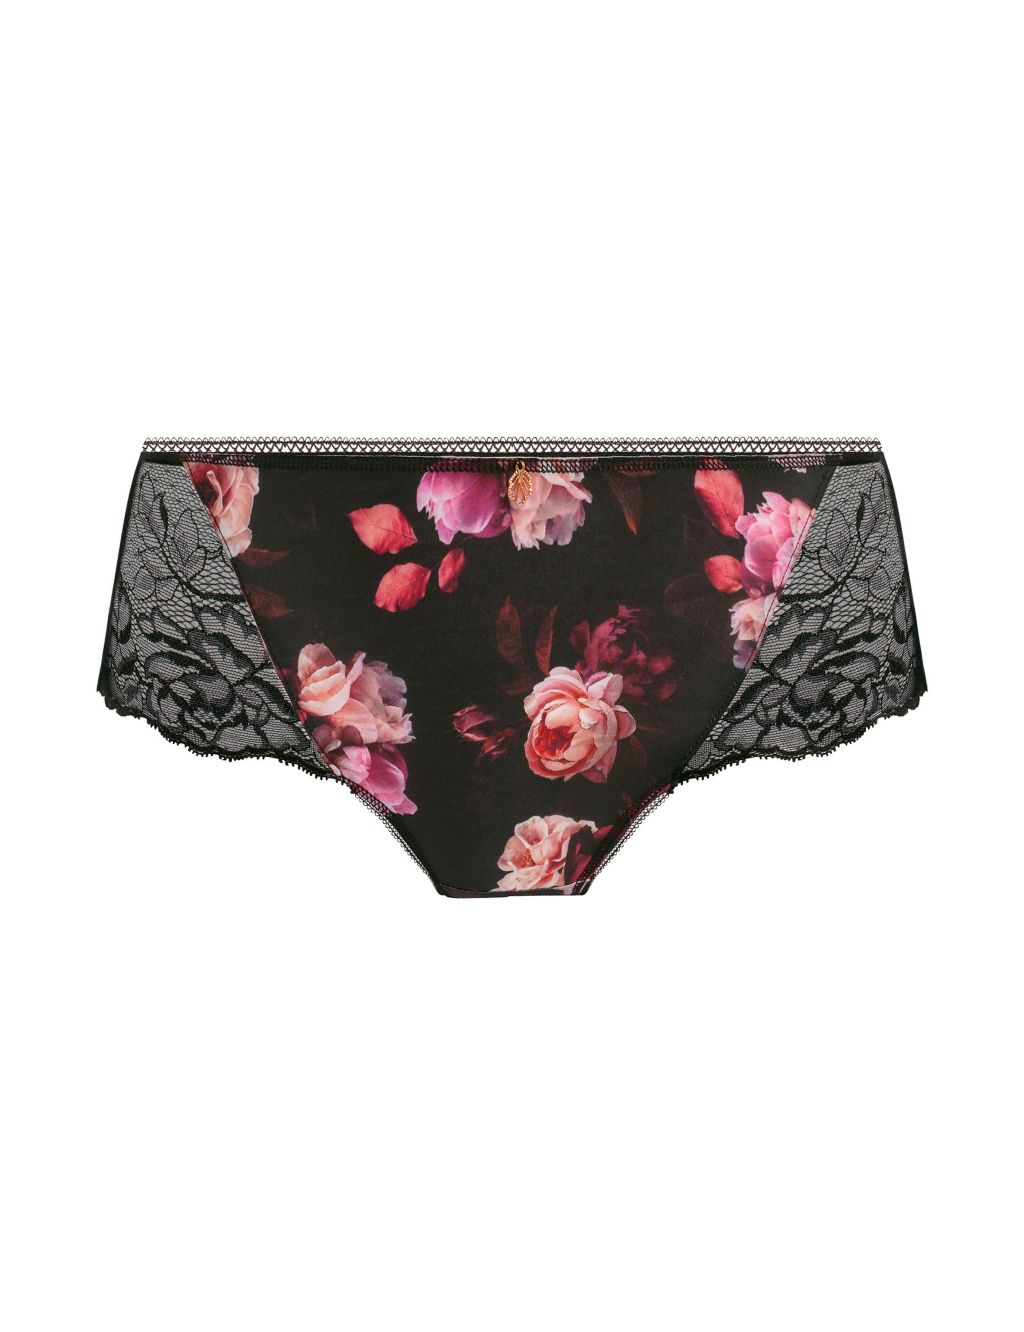 Pippa Lace Floral Knicker Shorts image 2